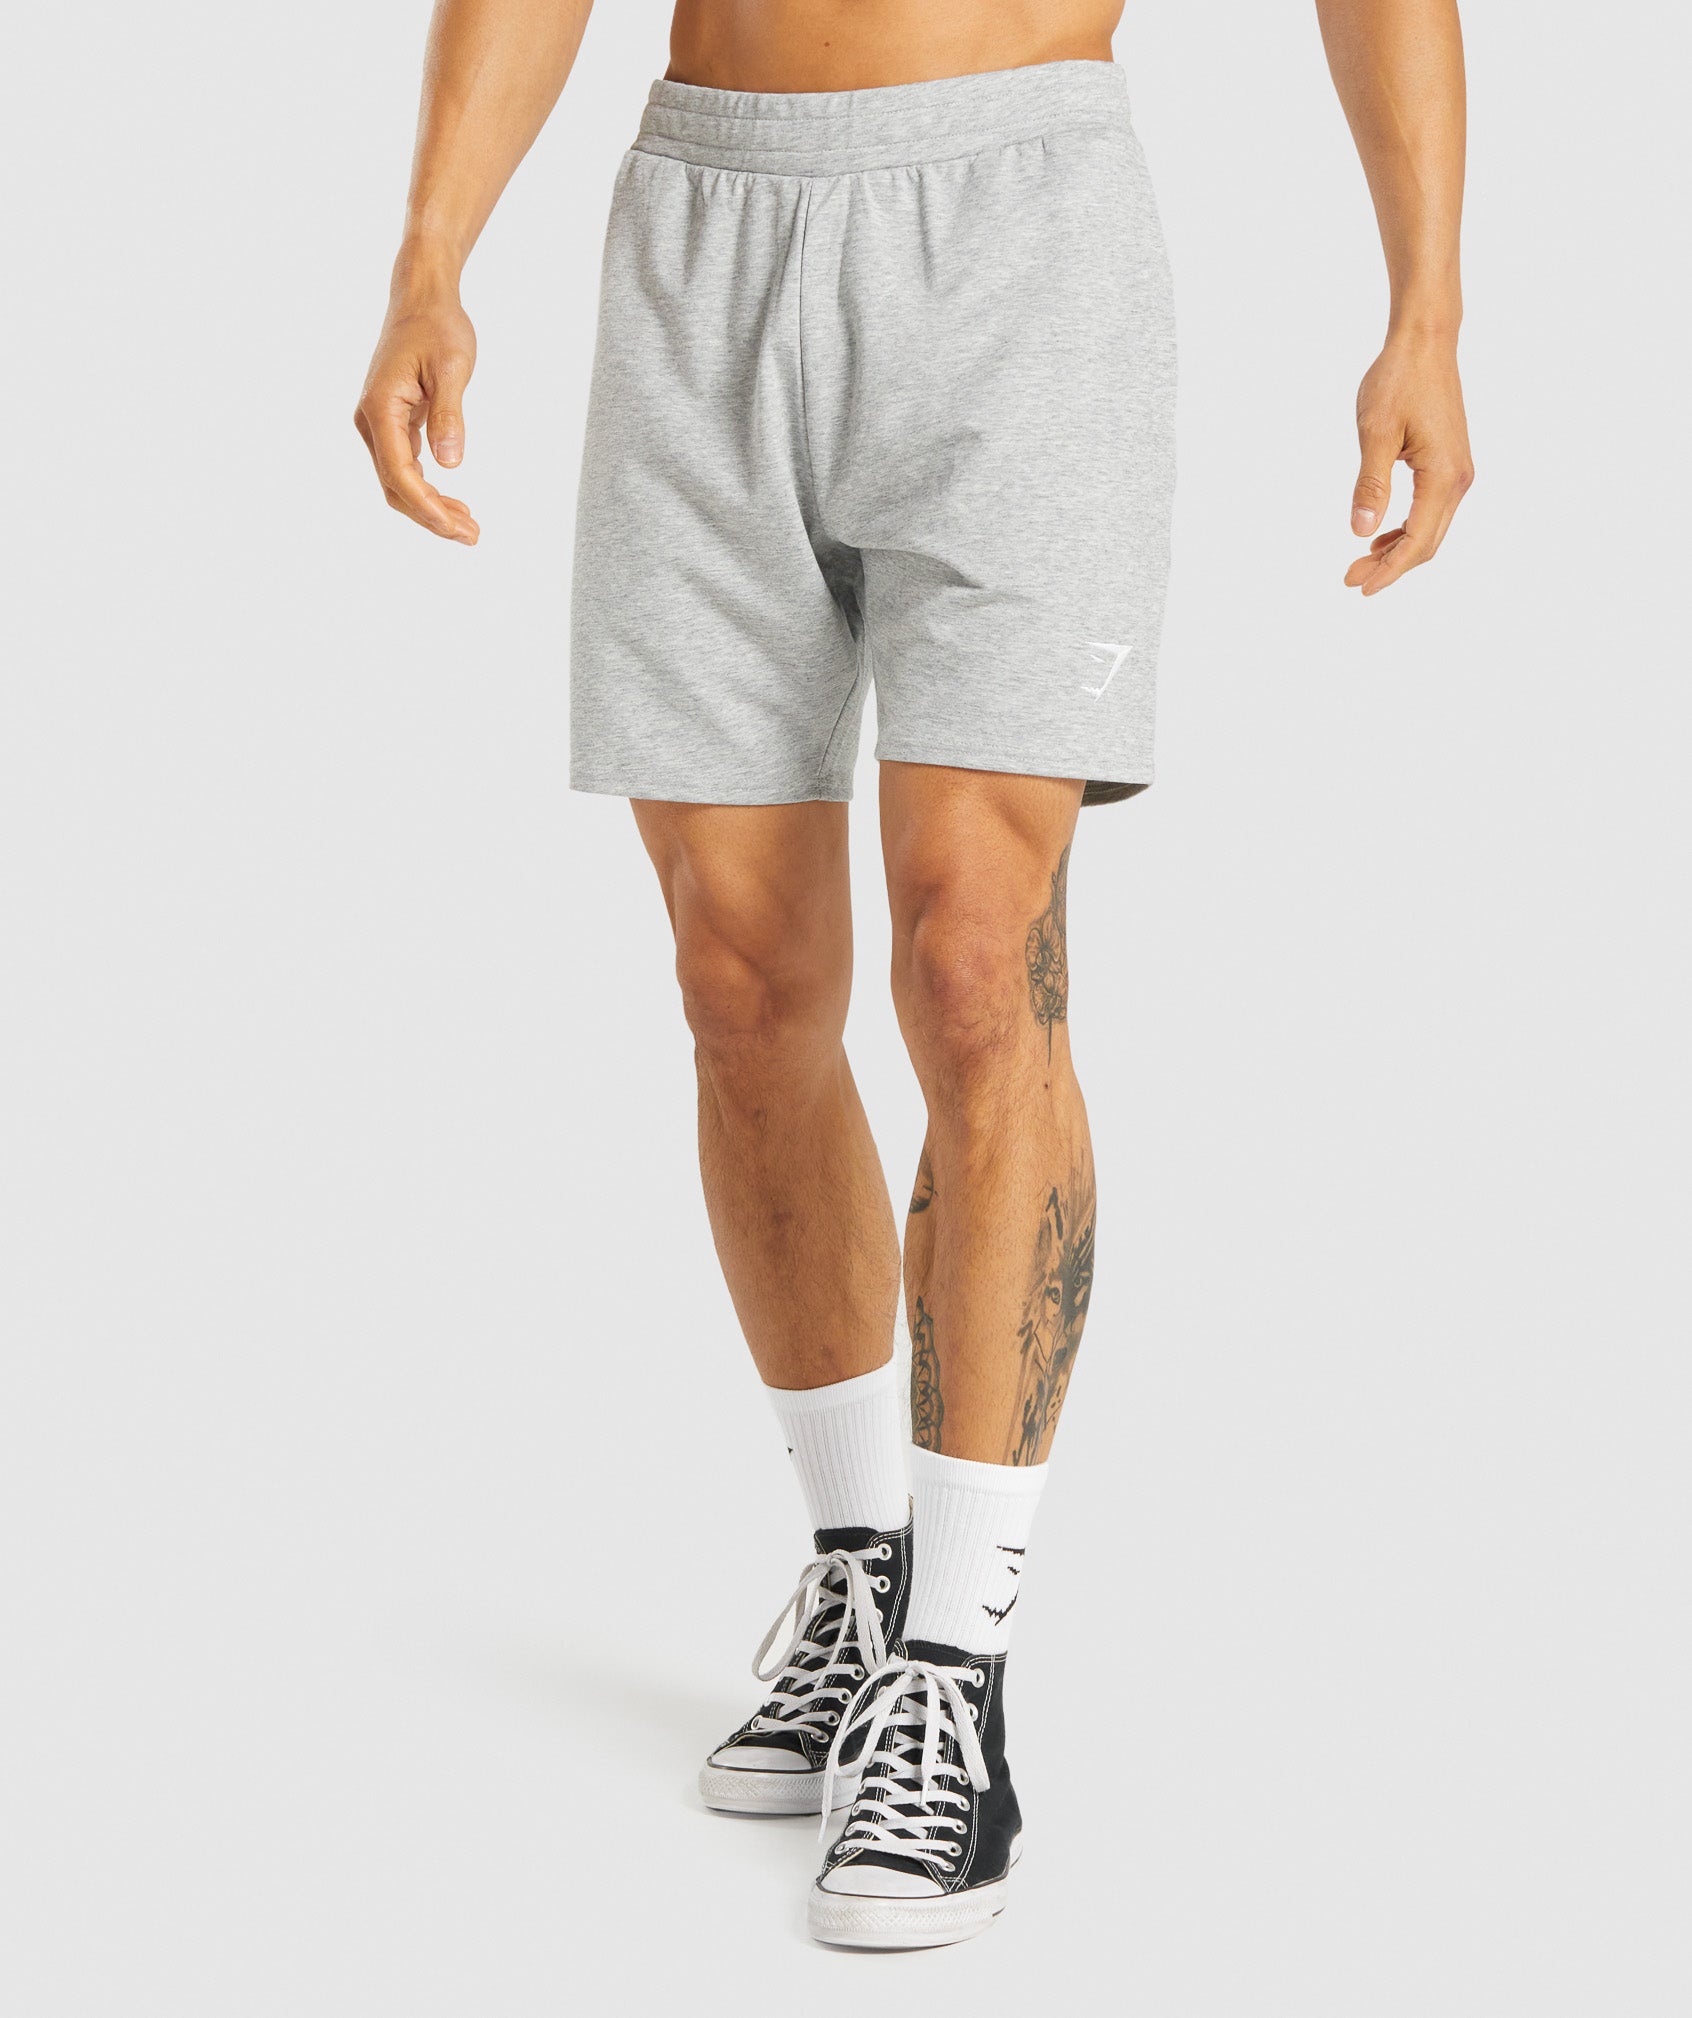 Critical 7" Shorts in Light Grey Core Marl - view 1